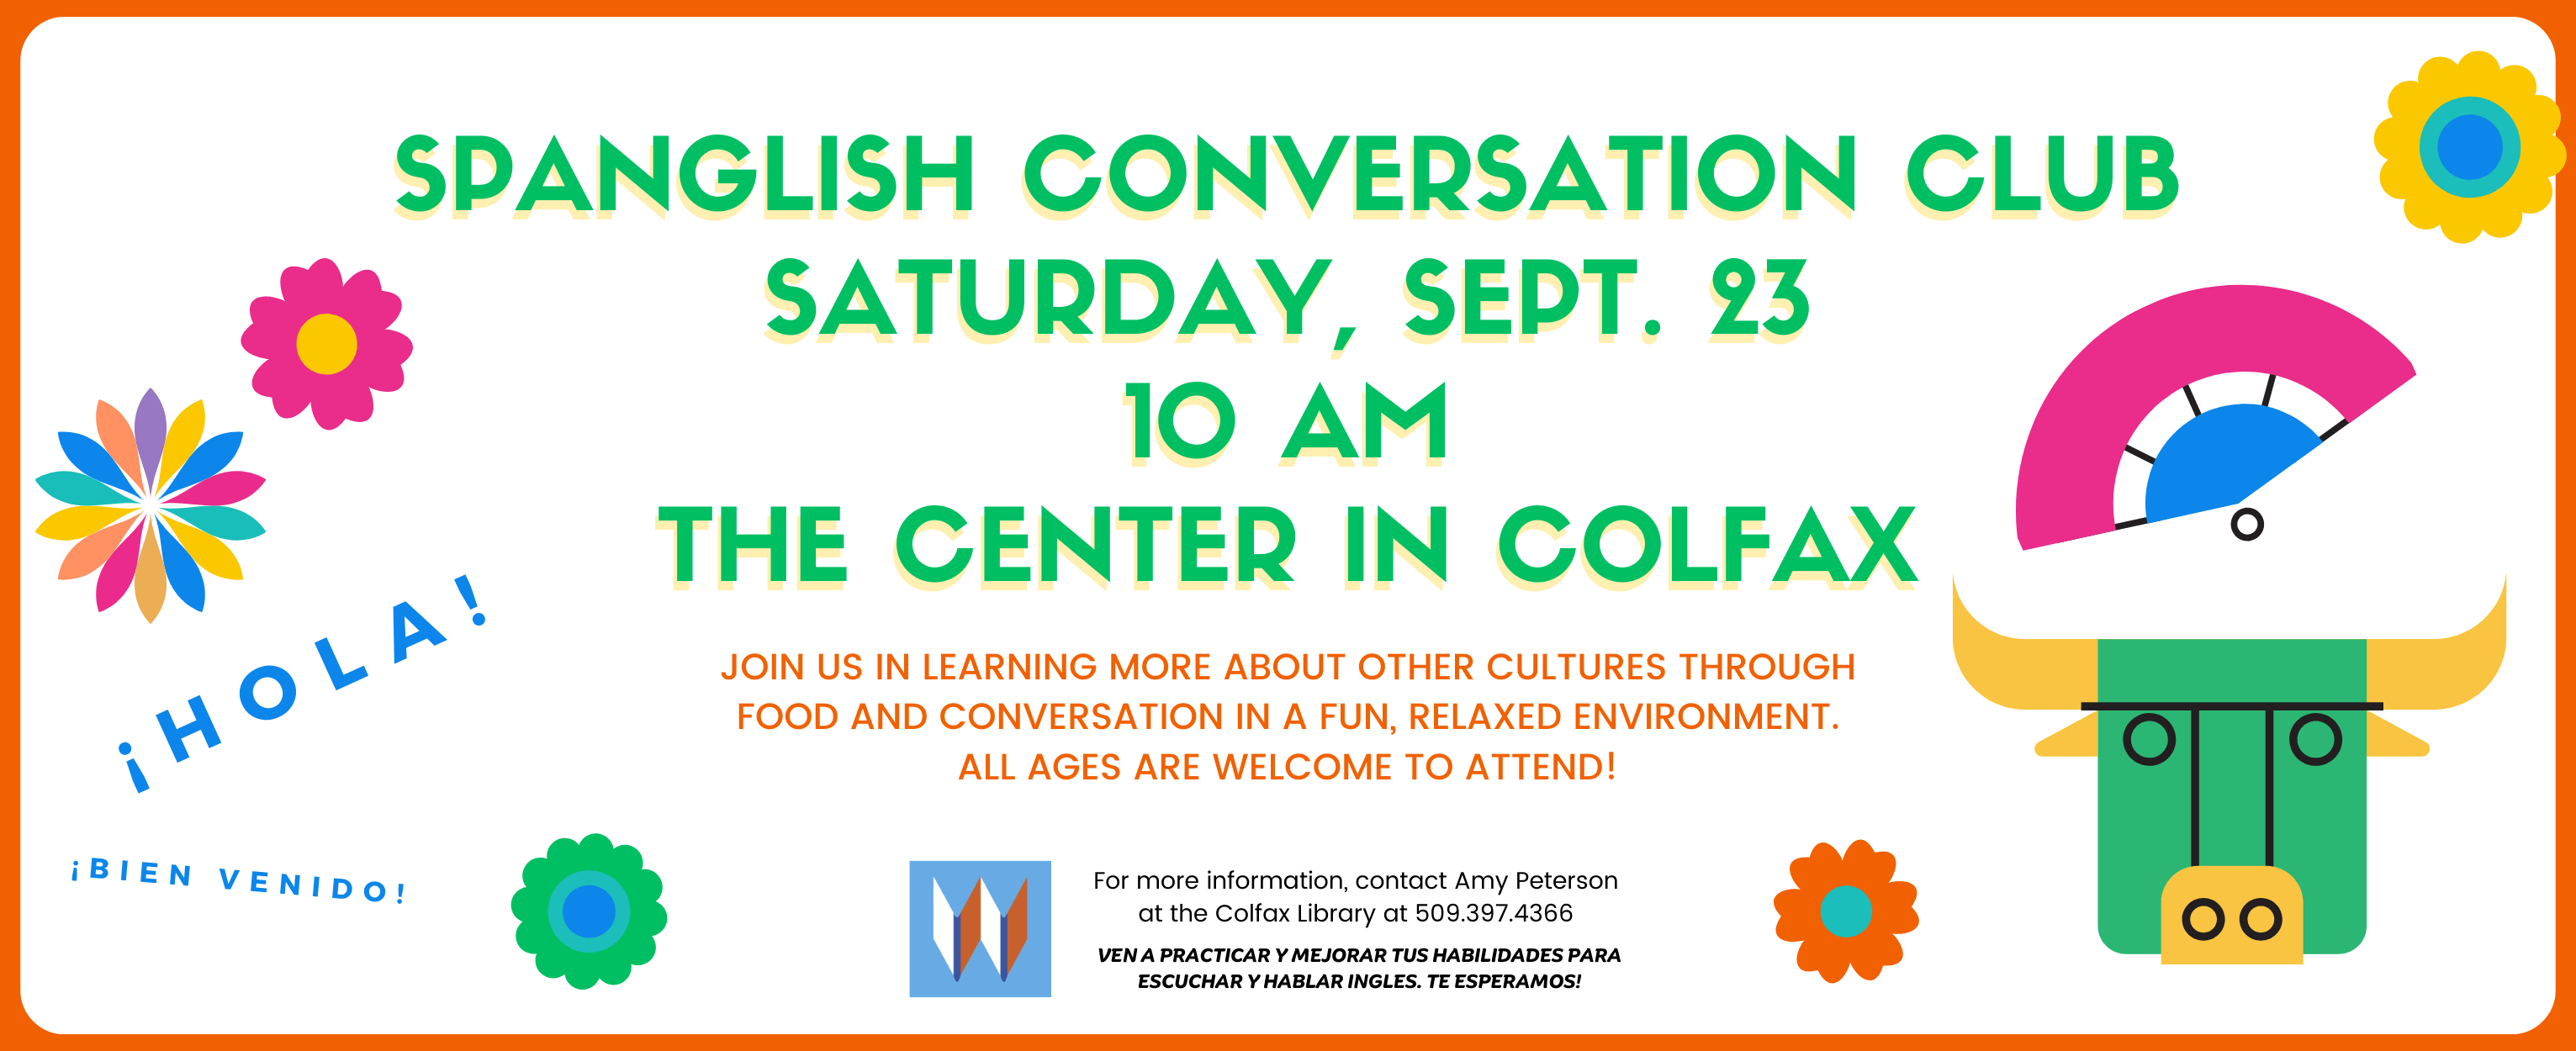 Spanglish Club at the Colfax Library! Saturday, Sept. 23 at 10:00 AM in the Center.